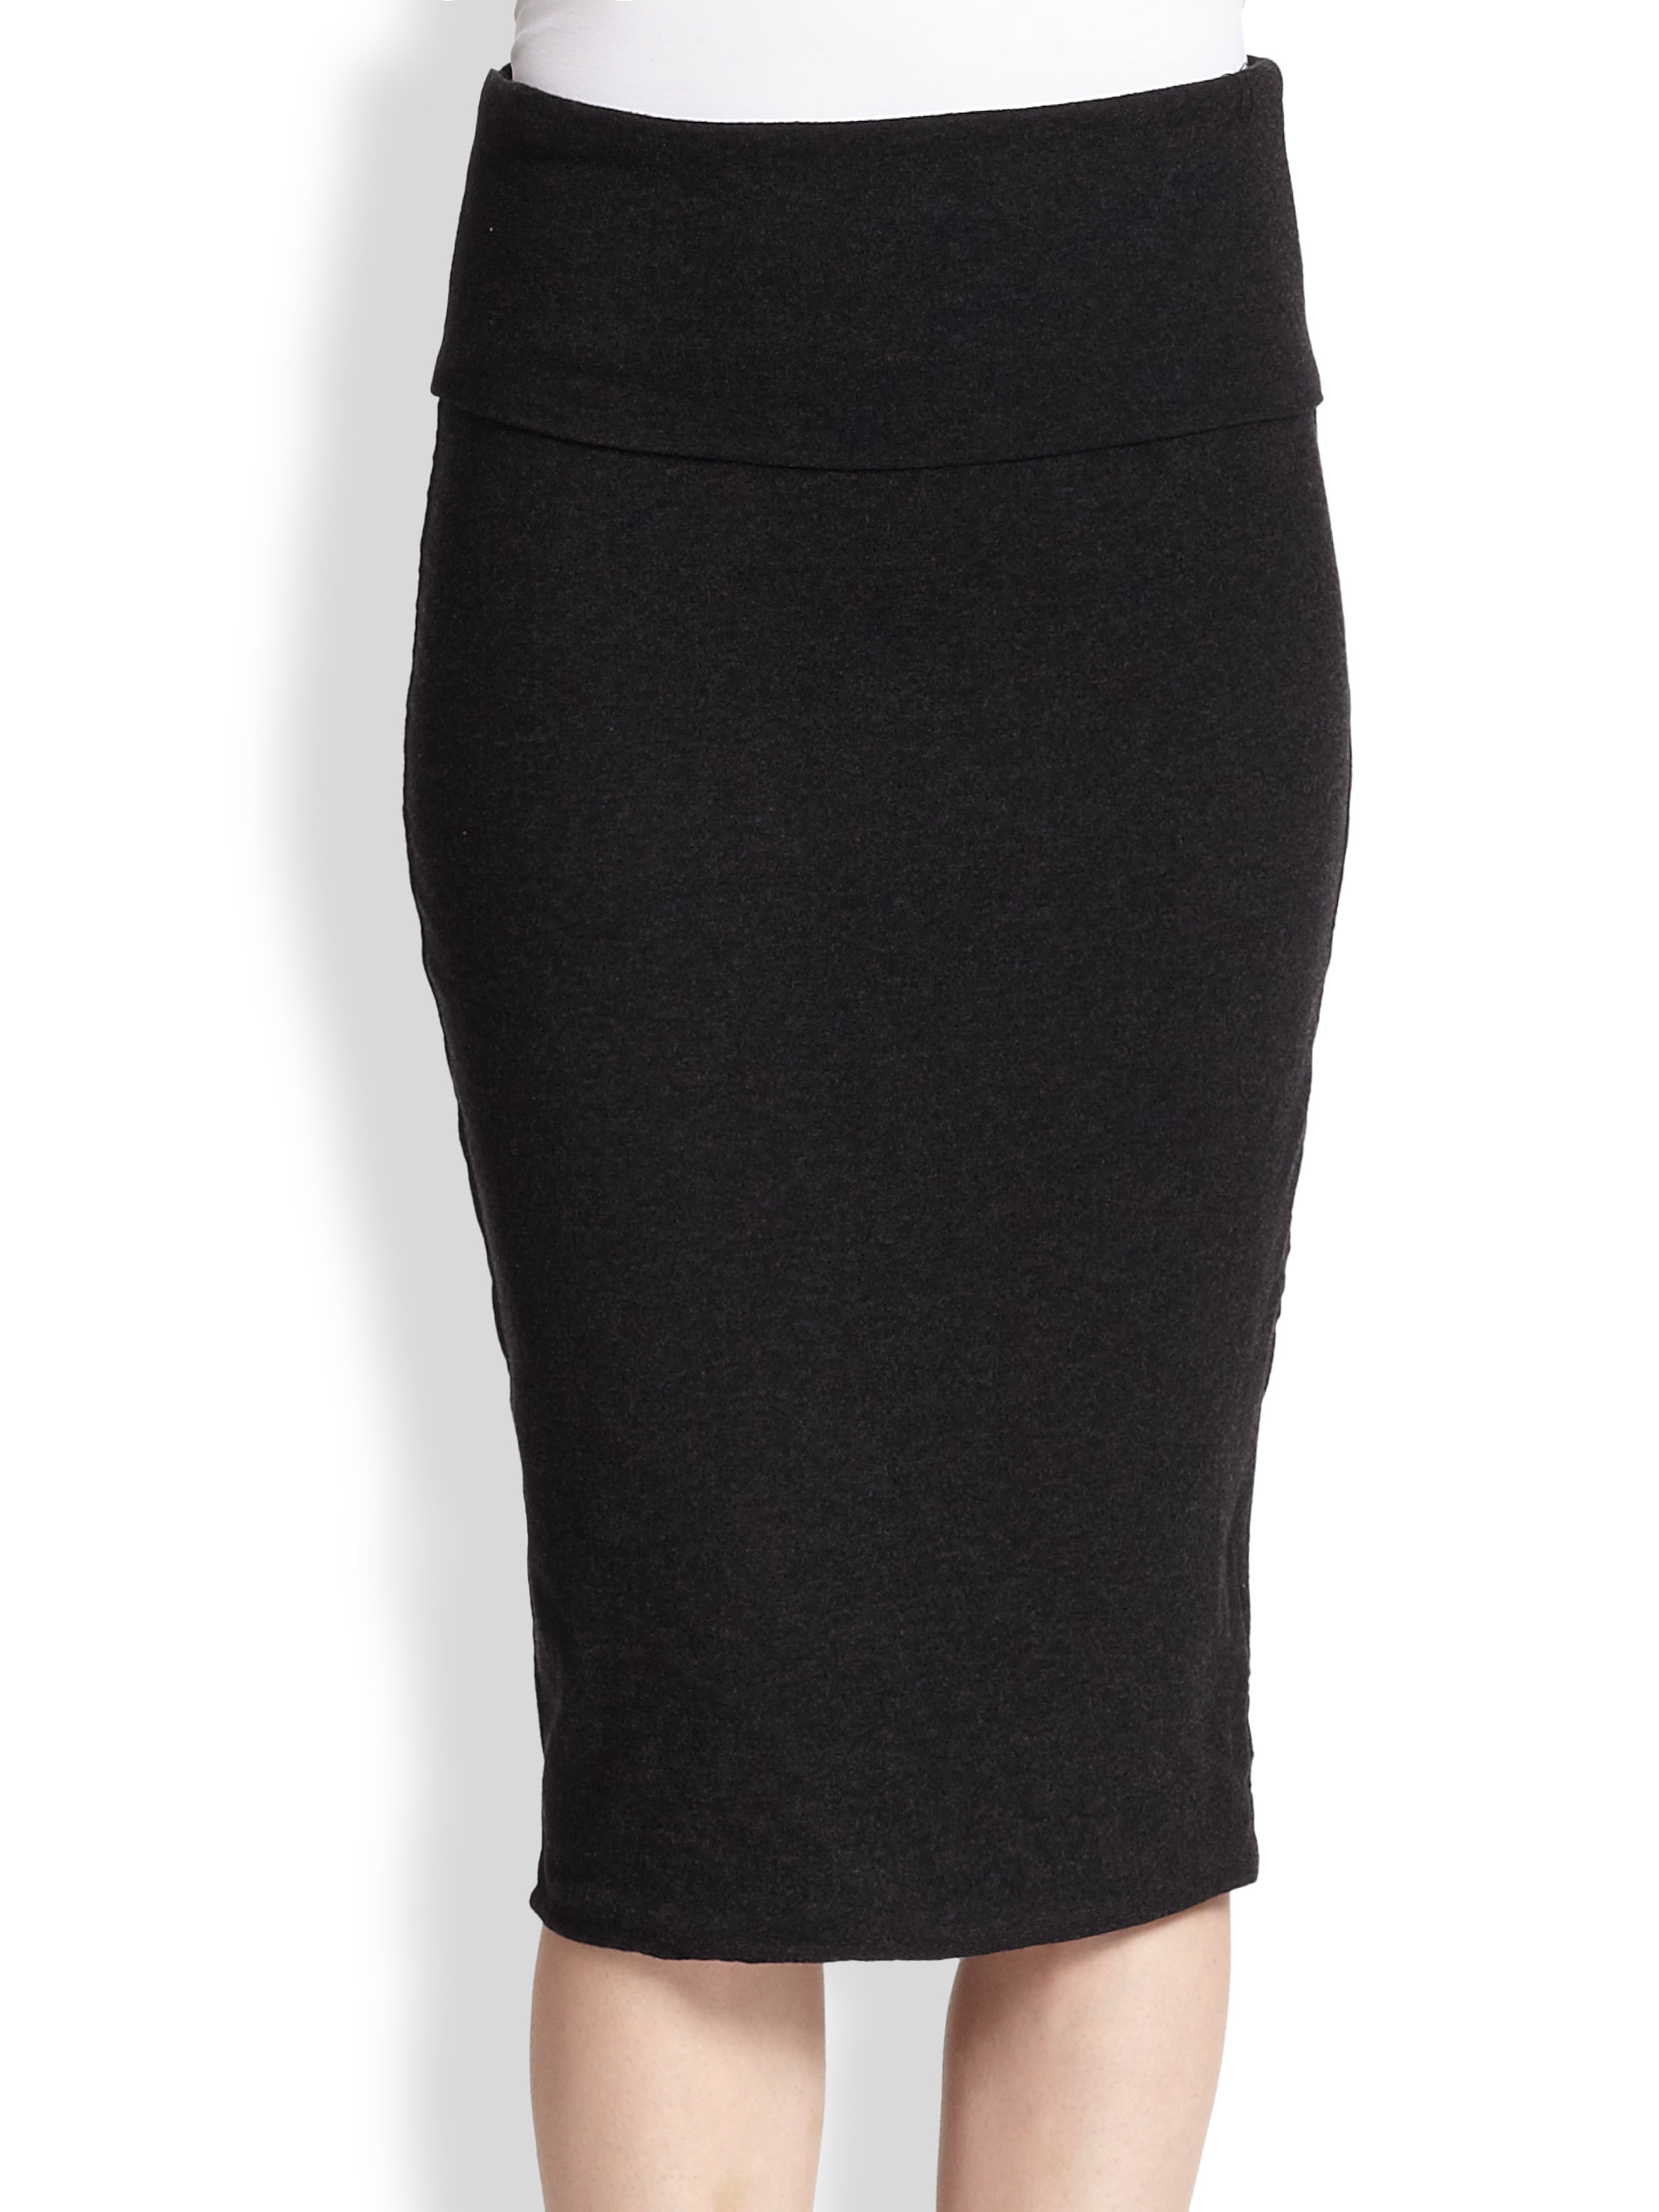 James Perse Stretch Cotton Jersey Pencil Skirt in Black | Lyst